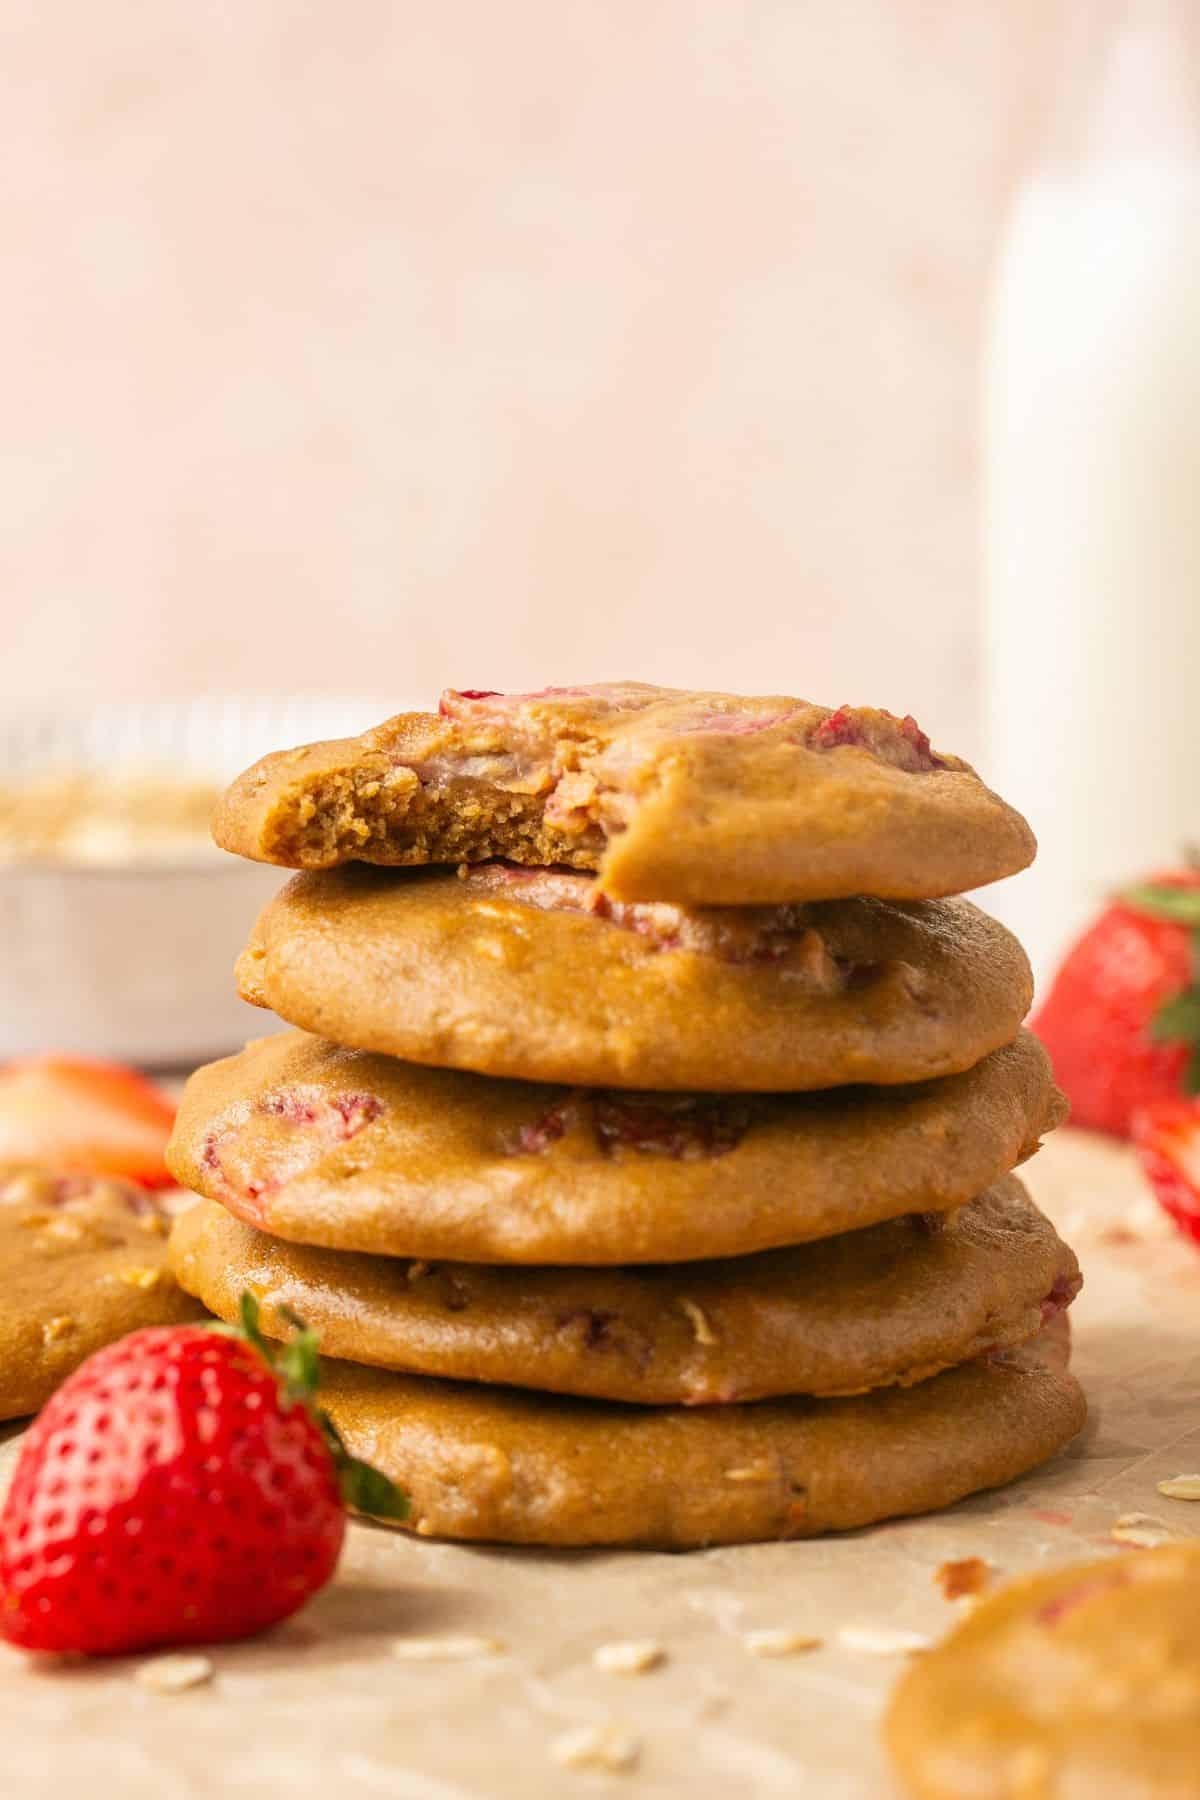 A stack of strawberry oatmeal cookies with a bottle of milk in the background and fresh berries scattered around.